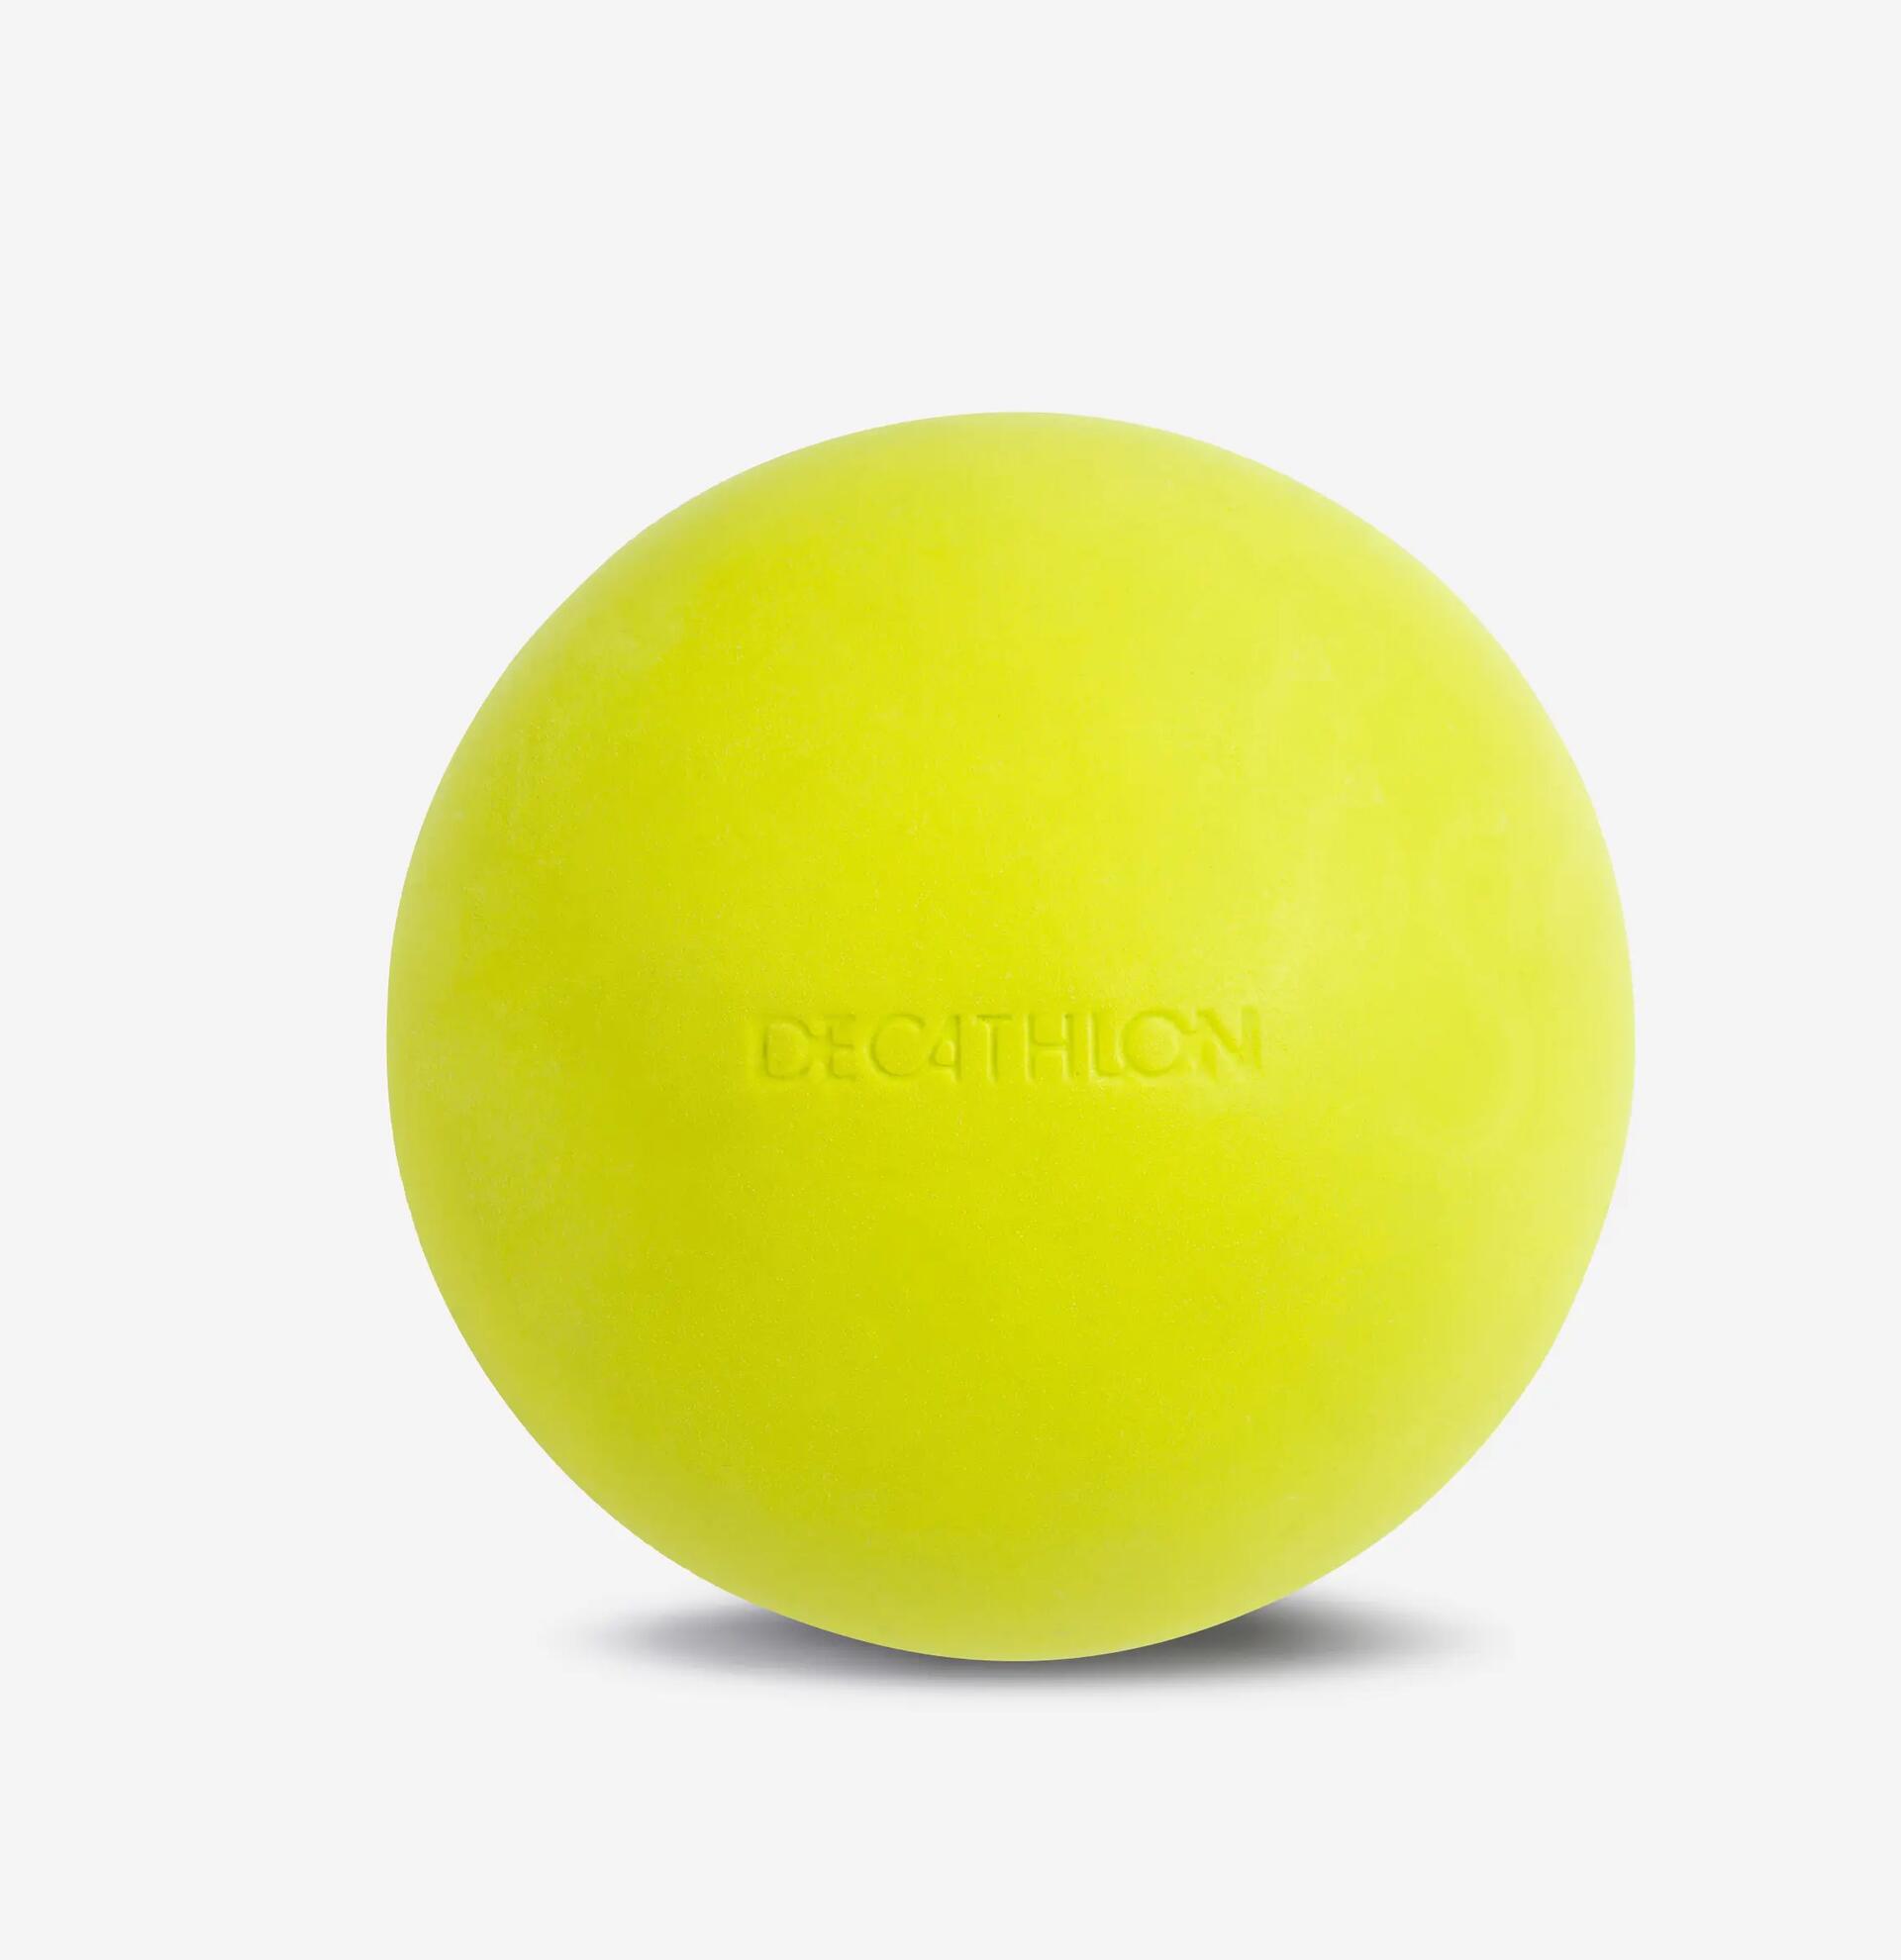 A massage ball that's ideal for massaging sore parts of the body.